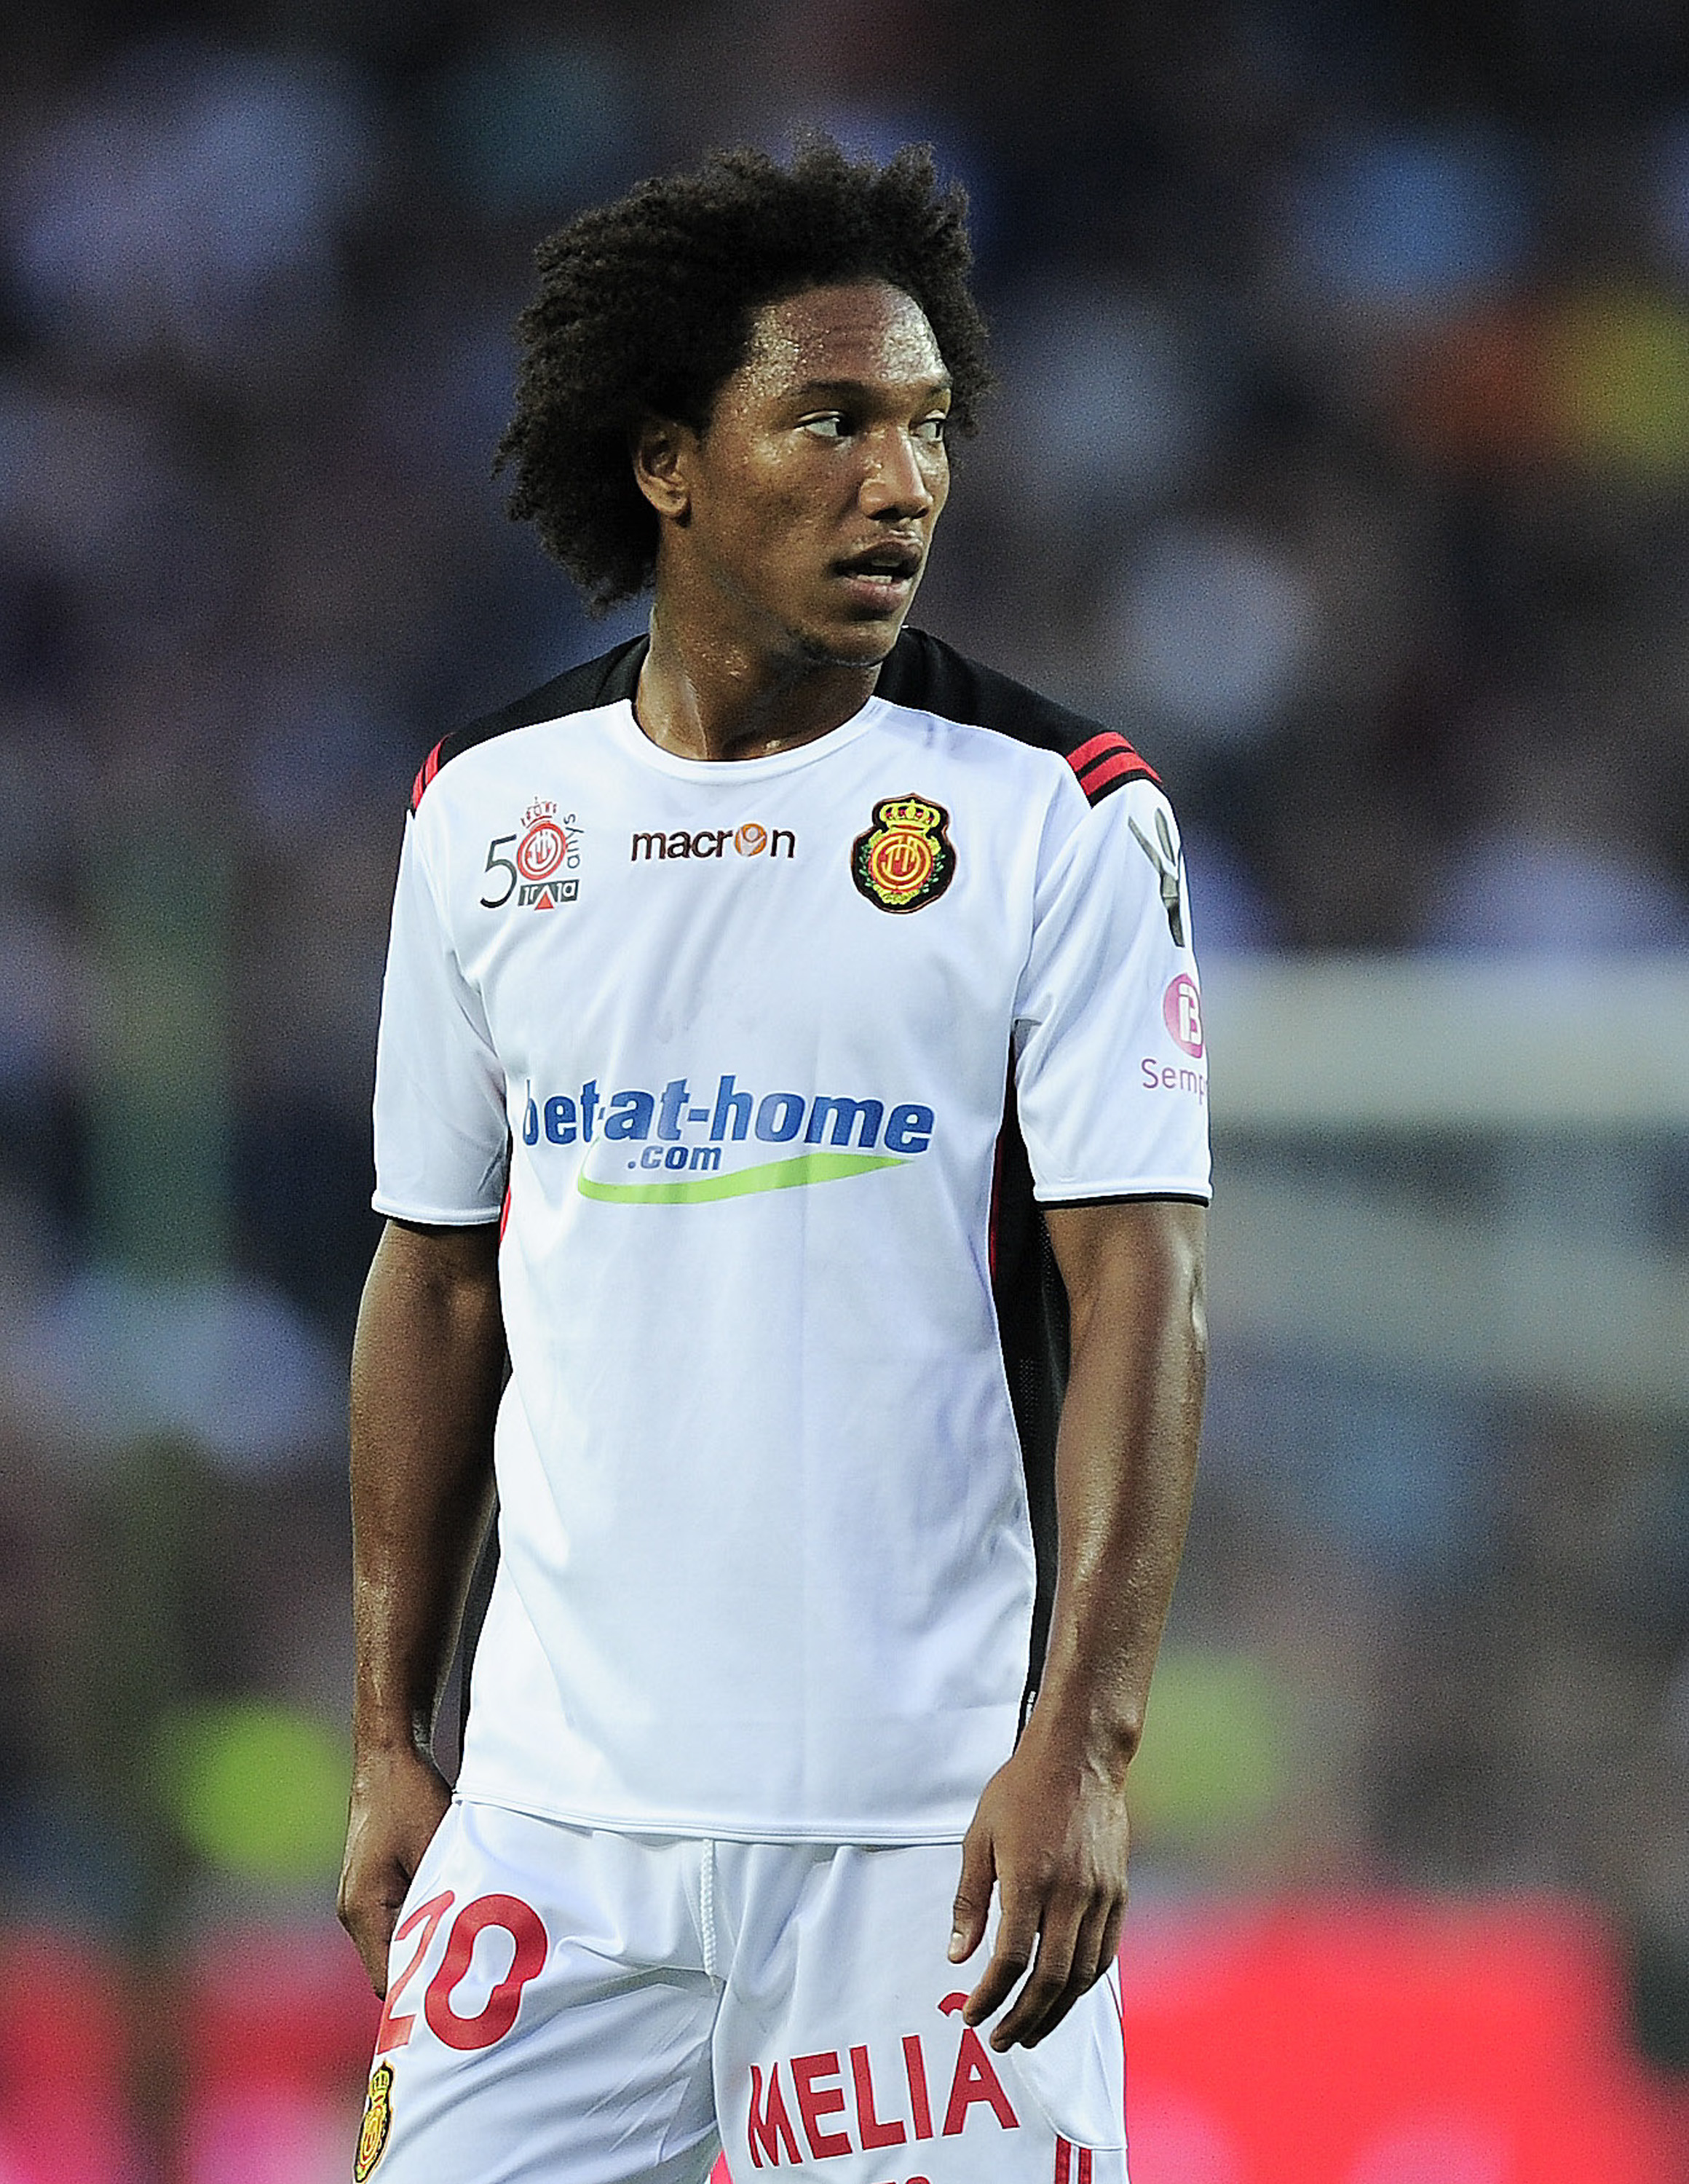 BARCELONA, SPAIN - OCTOBER 03:  Jonathan De Guzman of Mallorca looks on during the La Liga match between Barcelona and Mallorca at the Camp Nou stadium on October 3, 2010 in Barcelona, Spain. The Match ended in a 1-1 draw. (Photo by David Ramos/Getty Imag